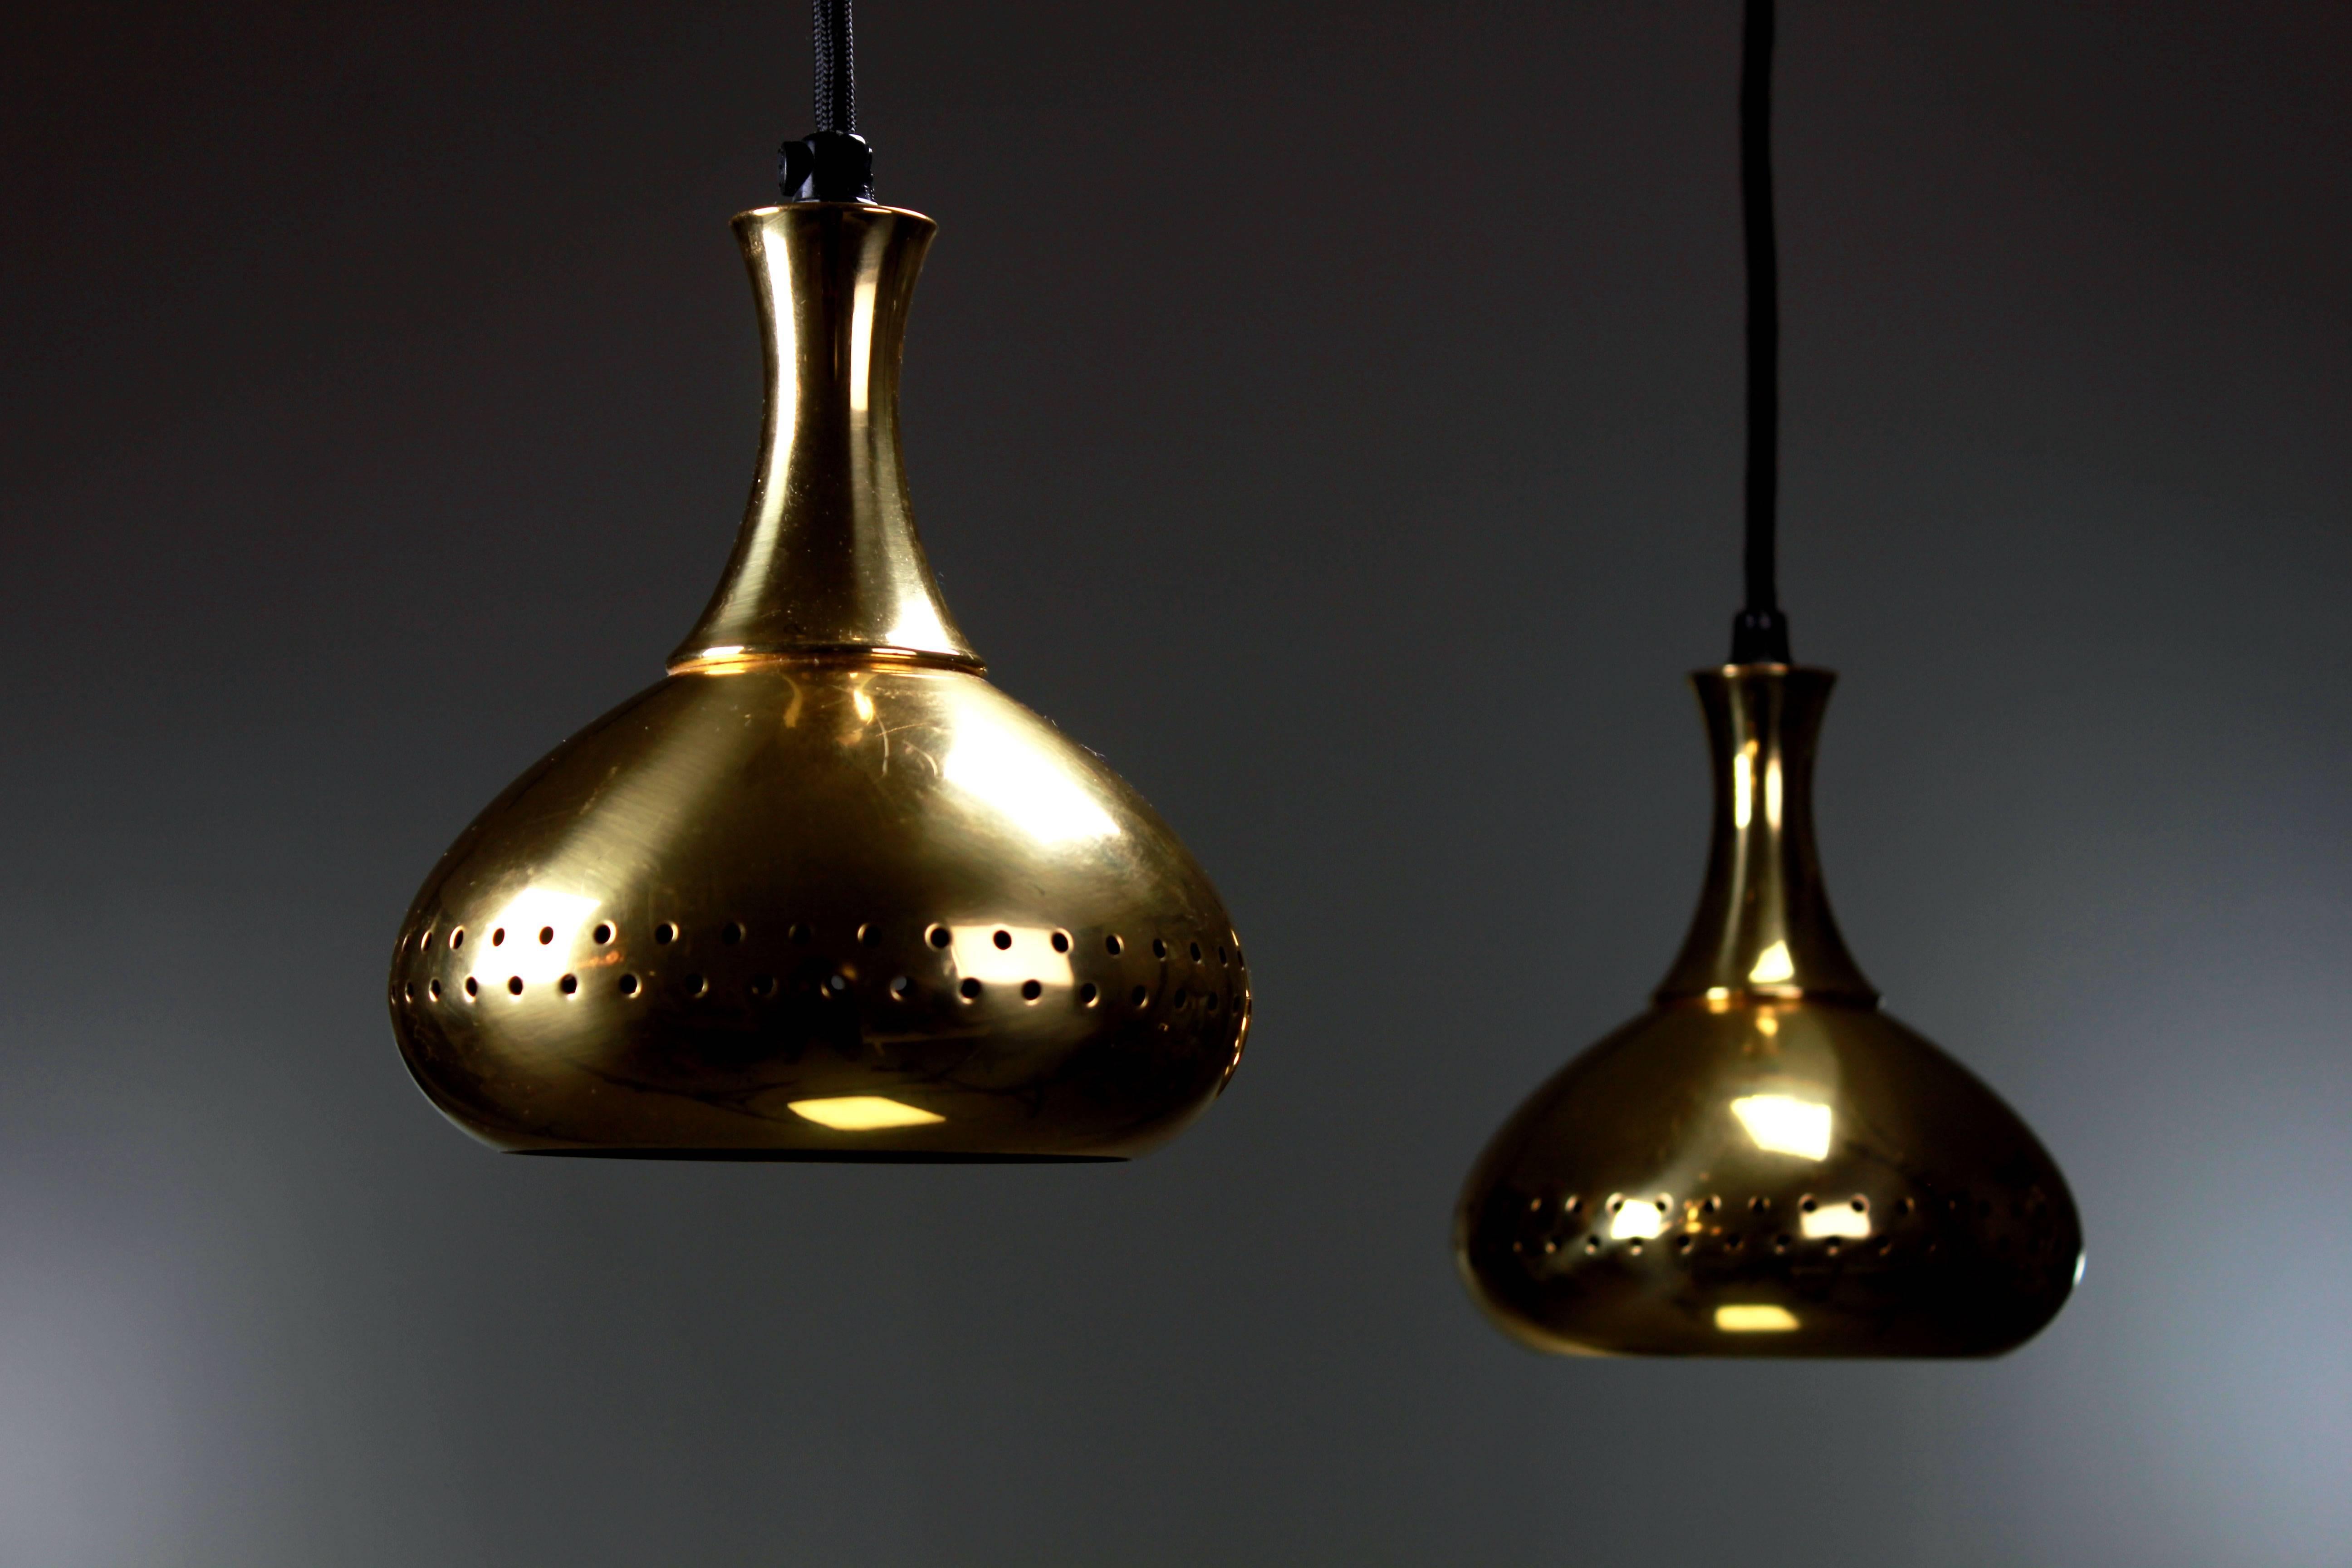 Beautiful pair of Scandinavian Mid Century Modern brass pendants with perforated details to let the light shine through. By Swedish designer Hans-Agne Jakobsson and manufactured in Sweden in the mid 1960s. Both rewired and in beautiful condition.